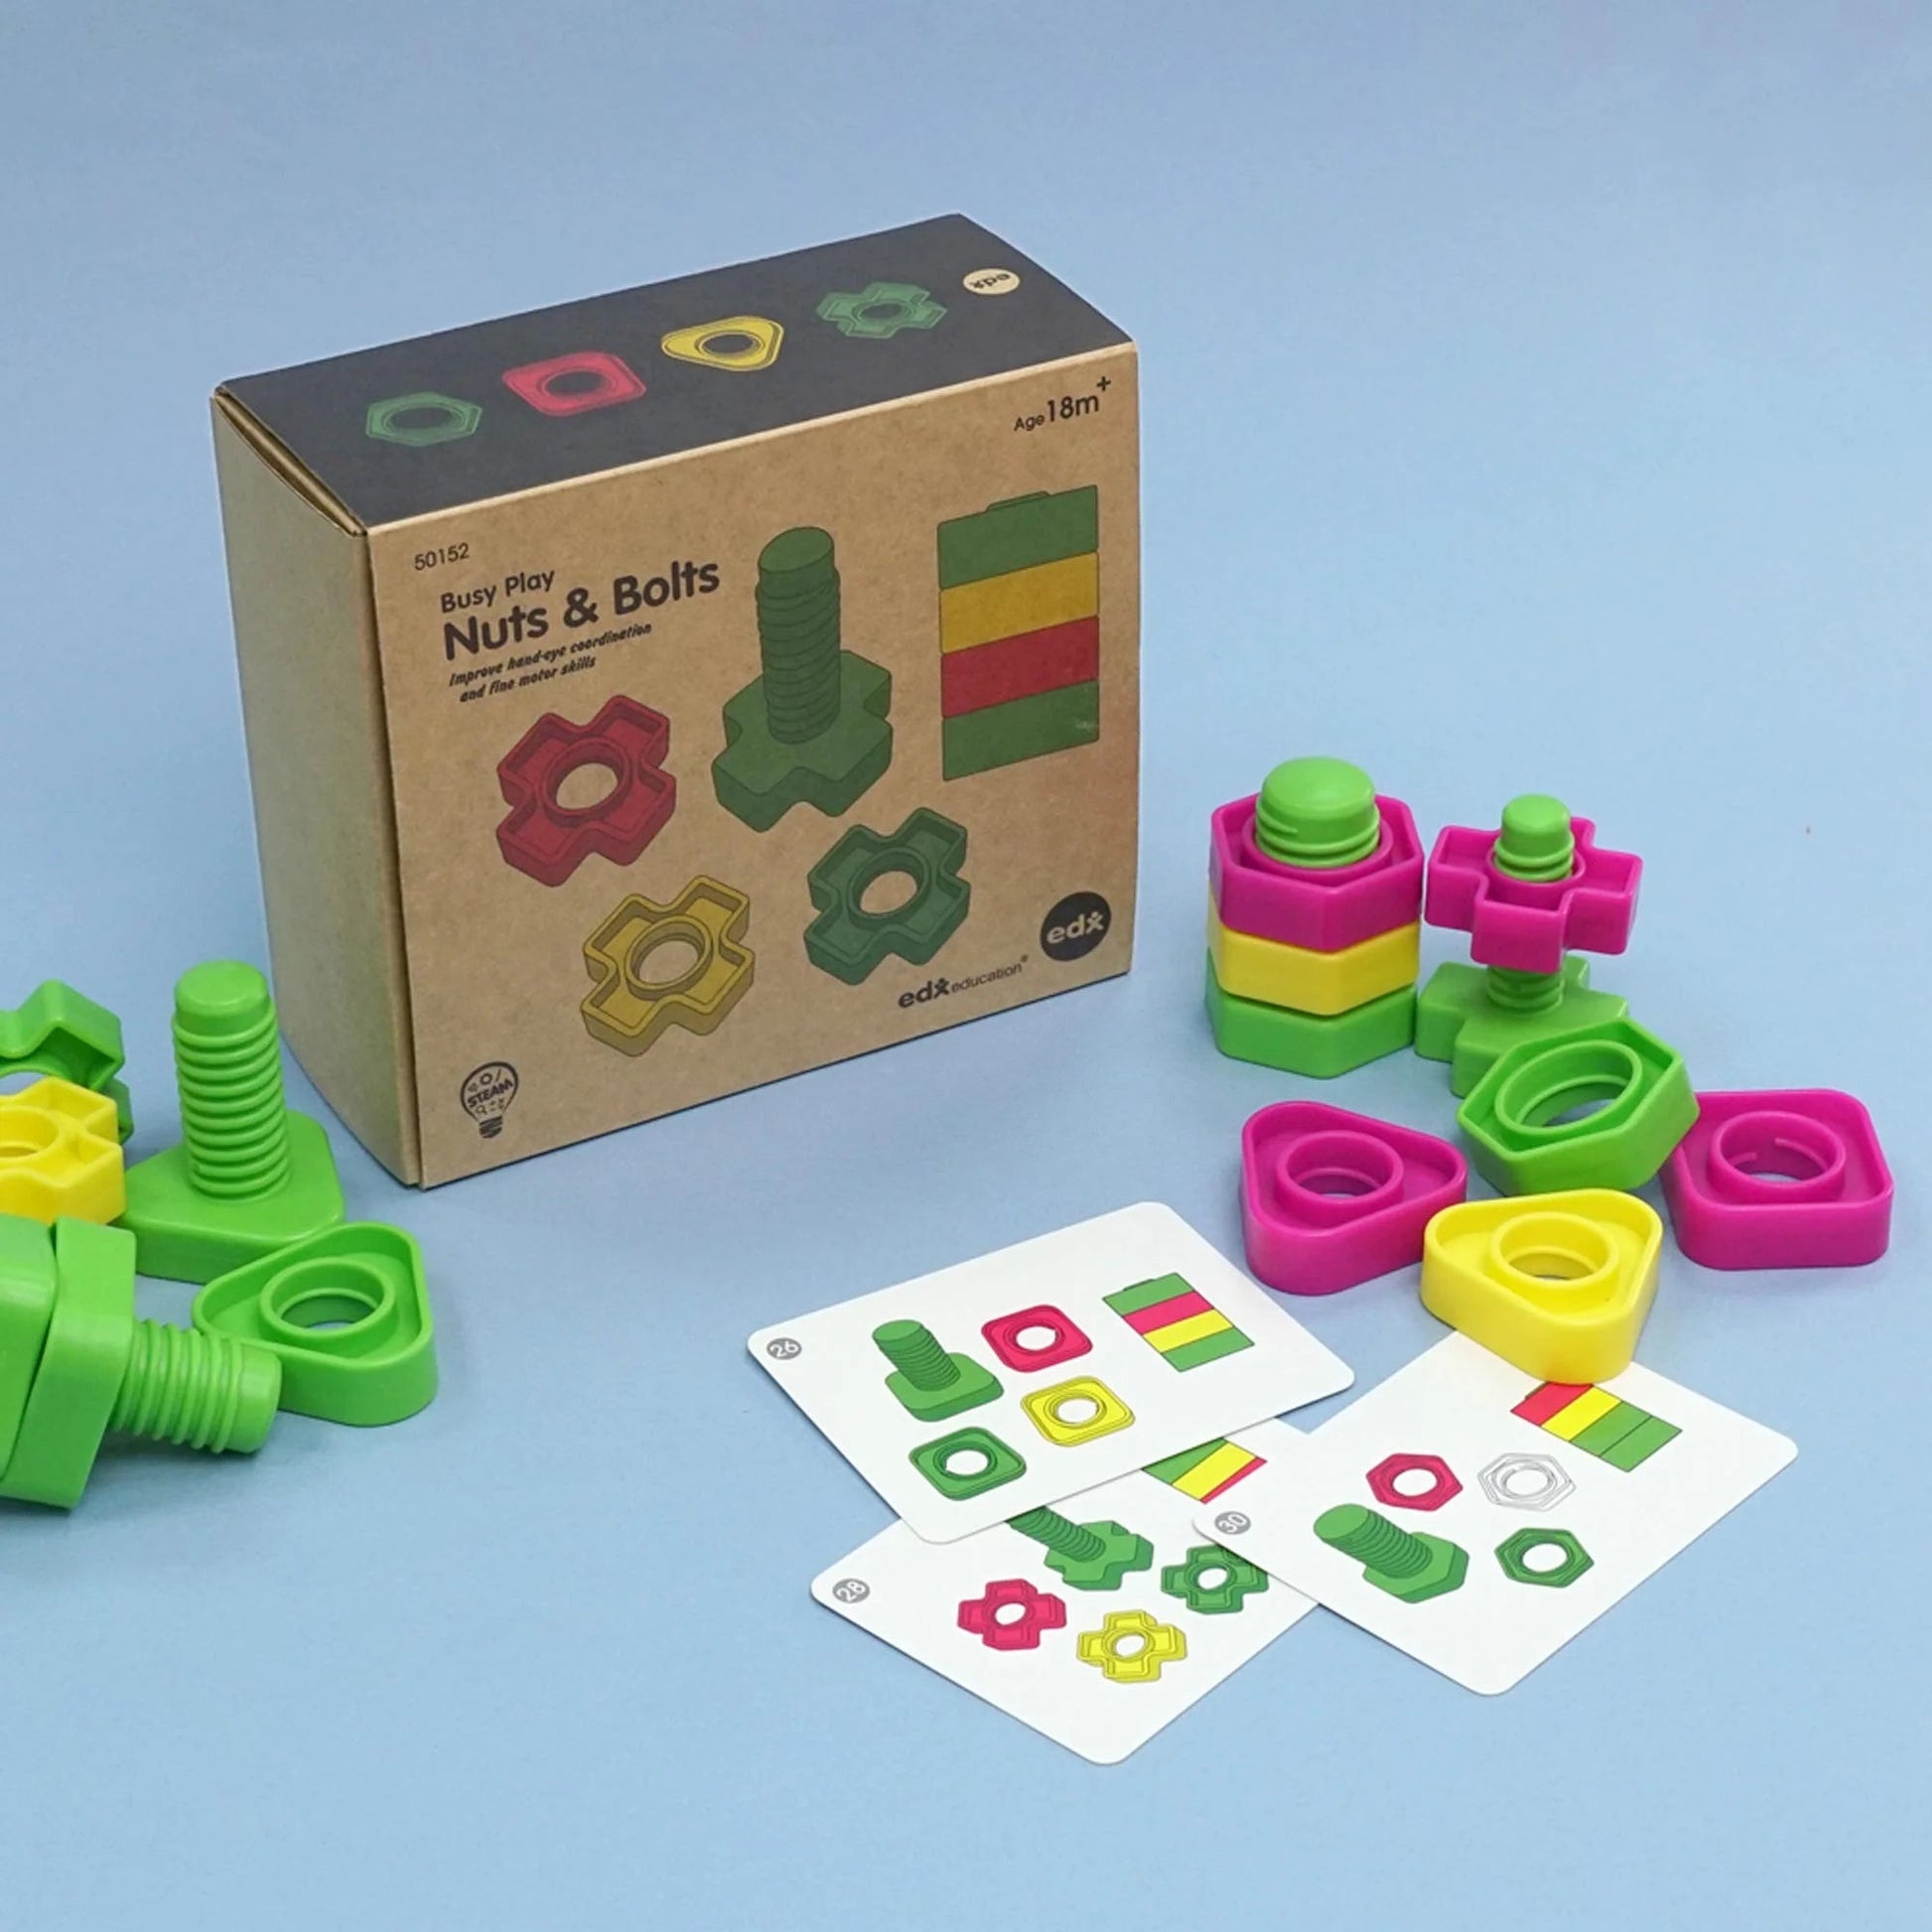 Edx Education - Busy Play Nuts & Bolts - Playlaan